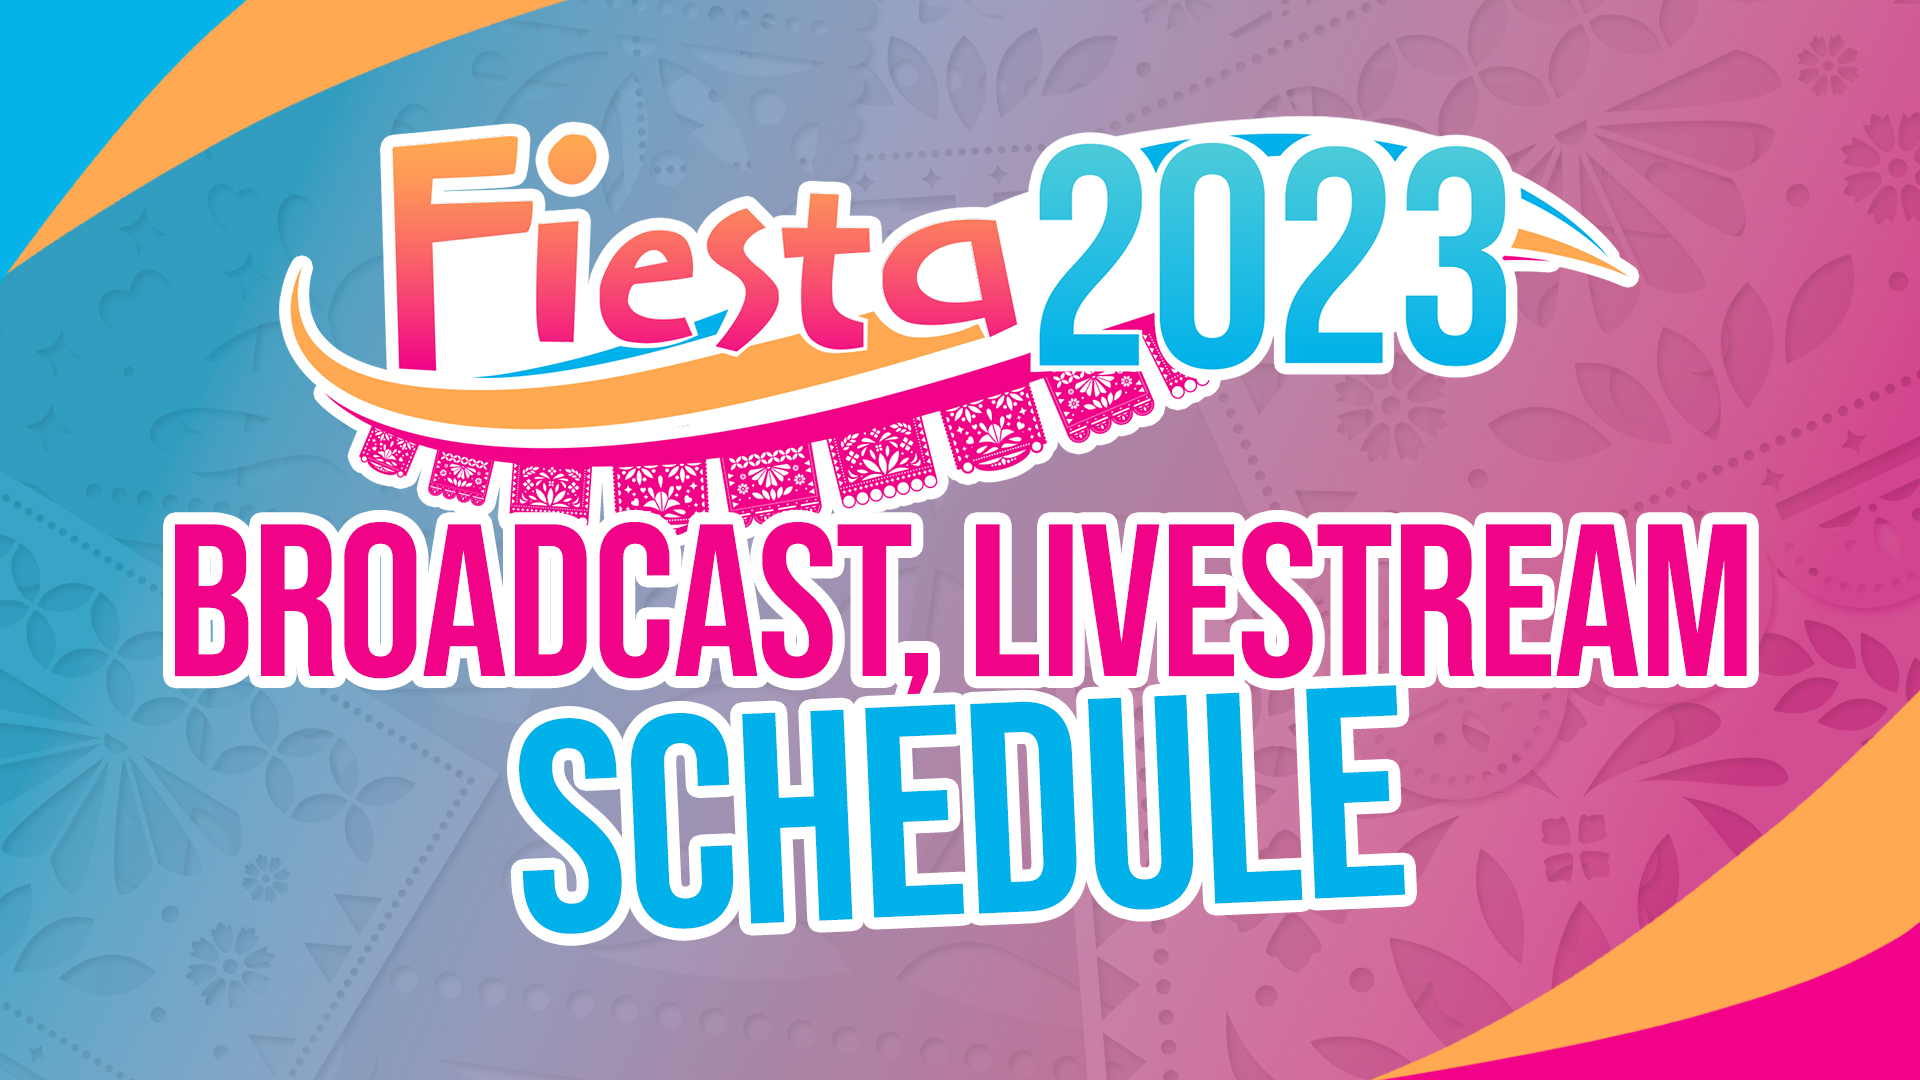 When, how to watch Fiesta parades and events on KSAT